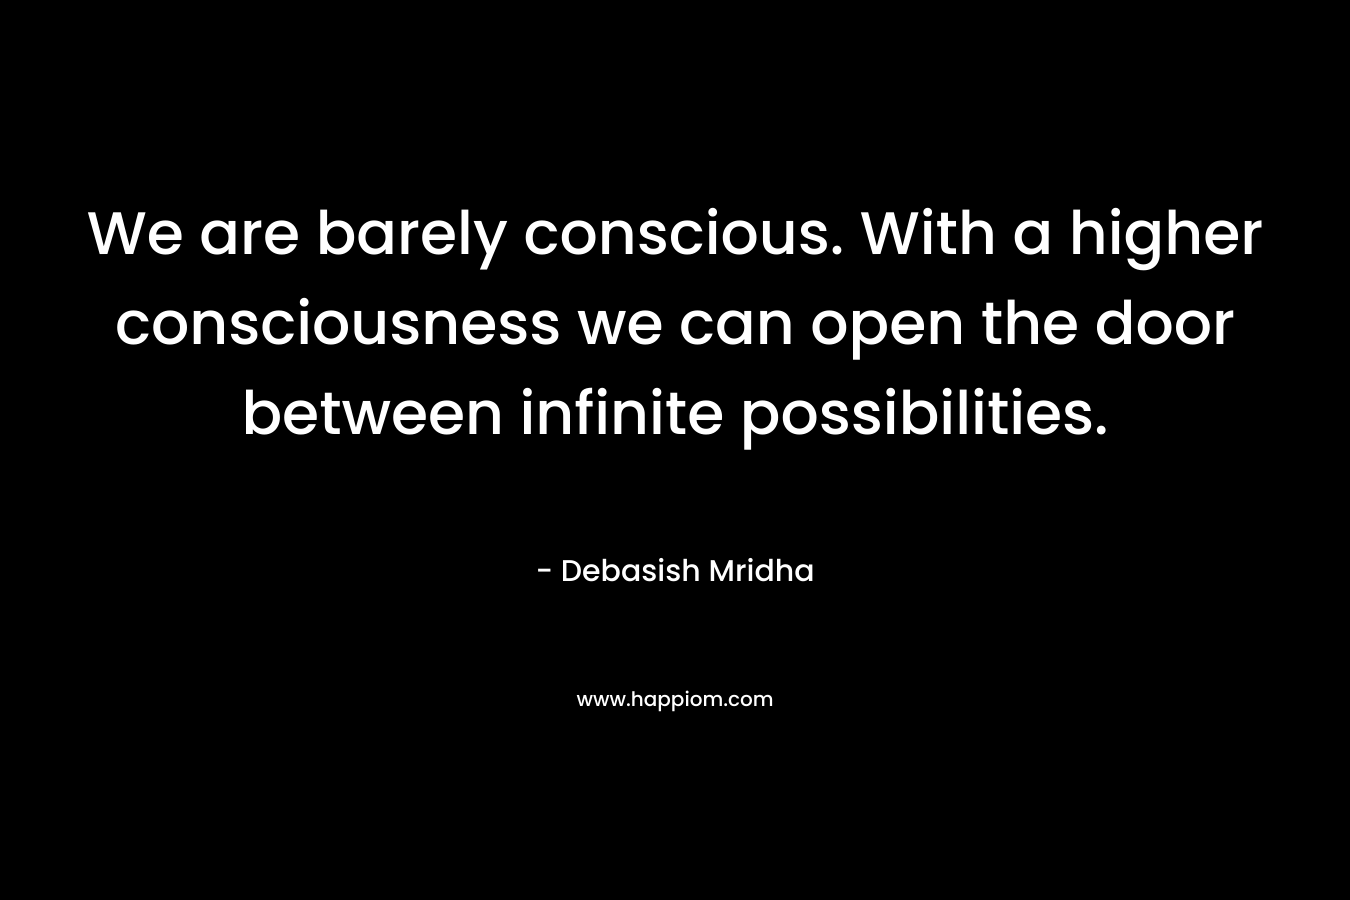 We are barely conscious. With a higher consciousness we can open the door between infinite possibilities.